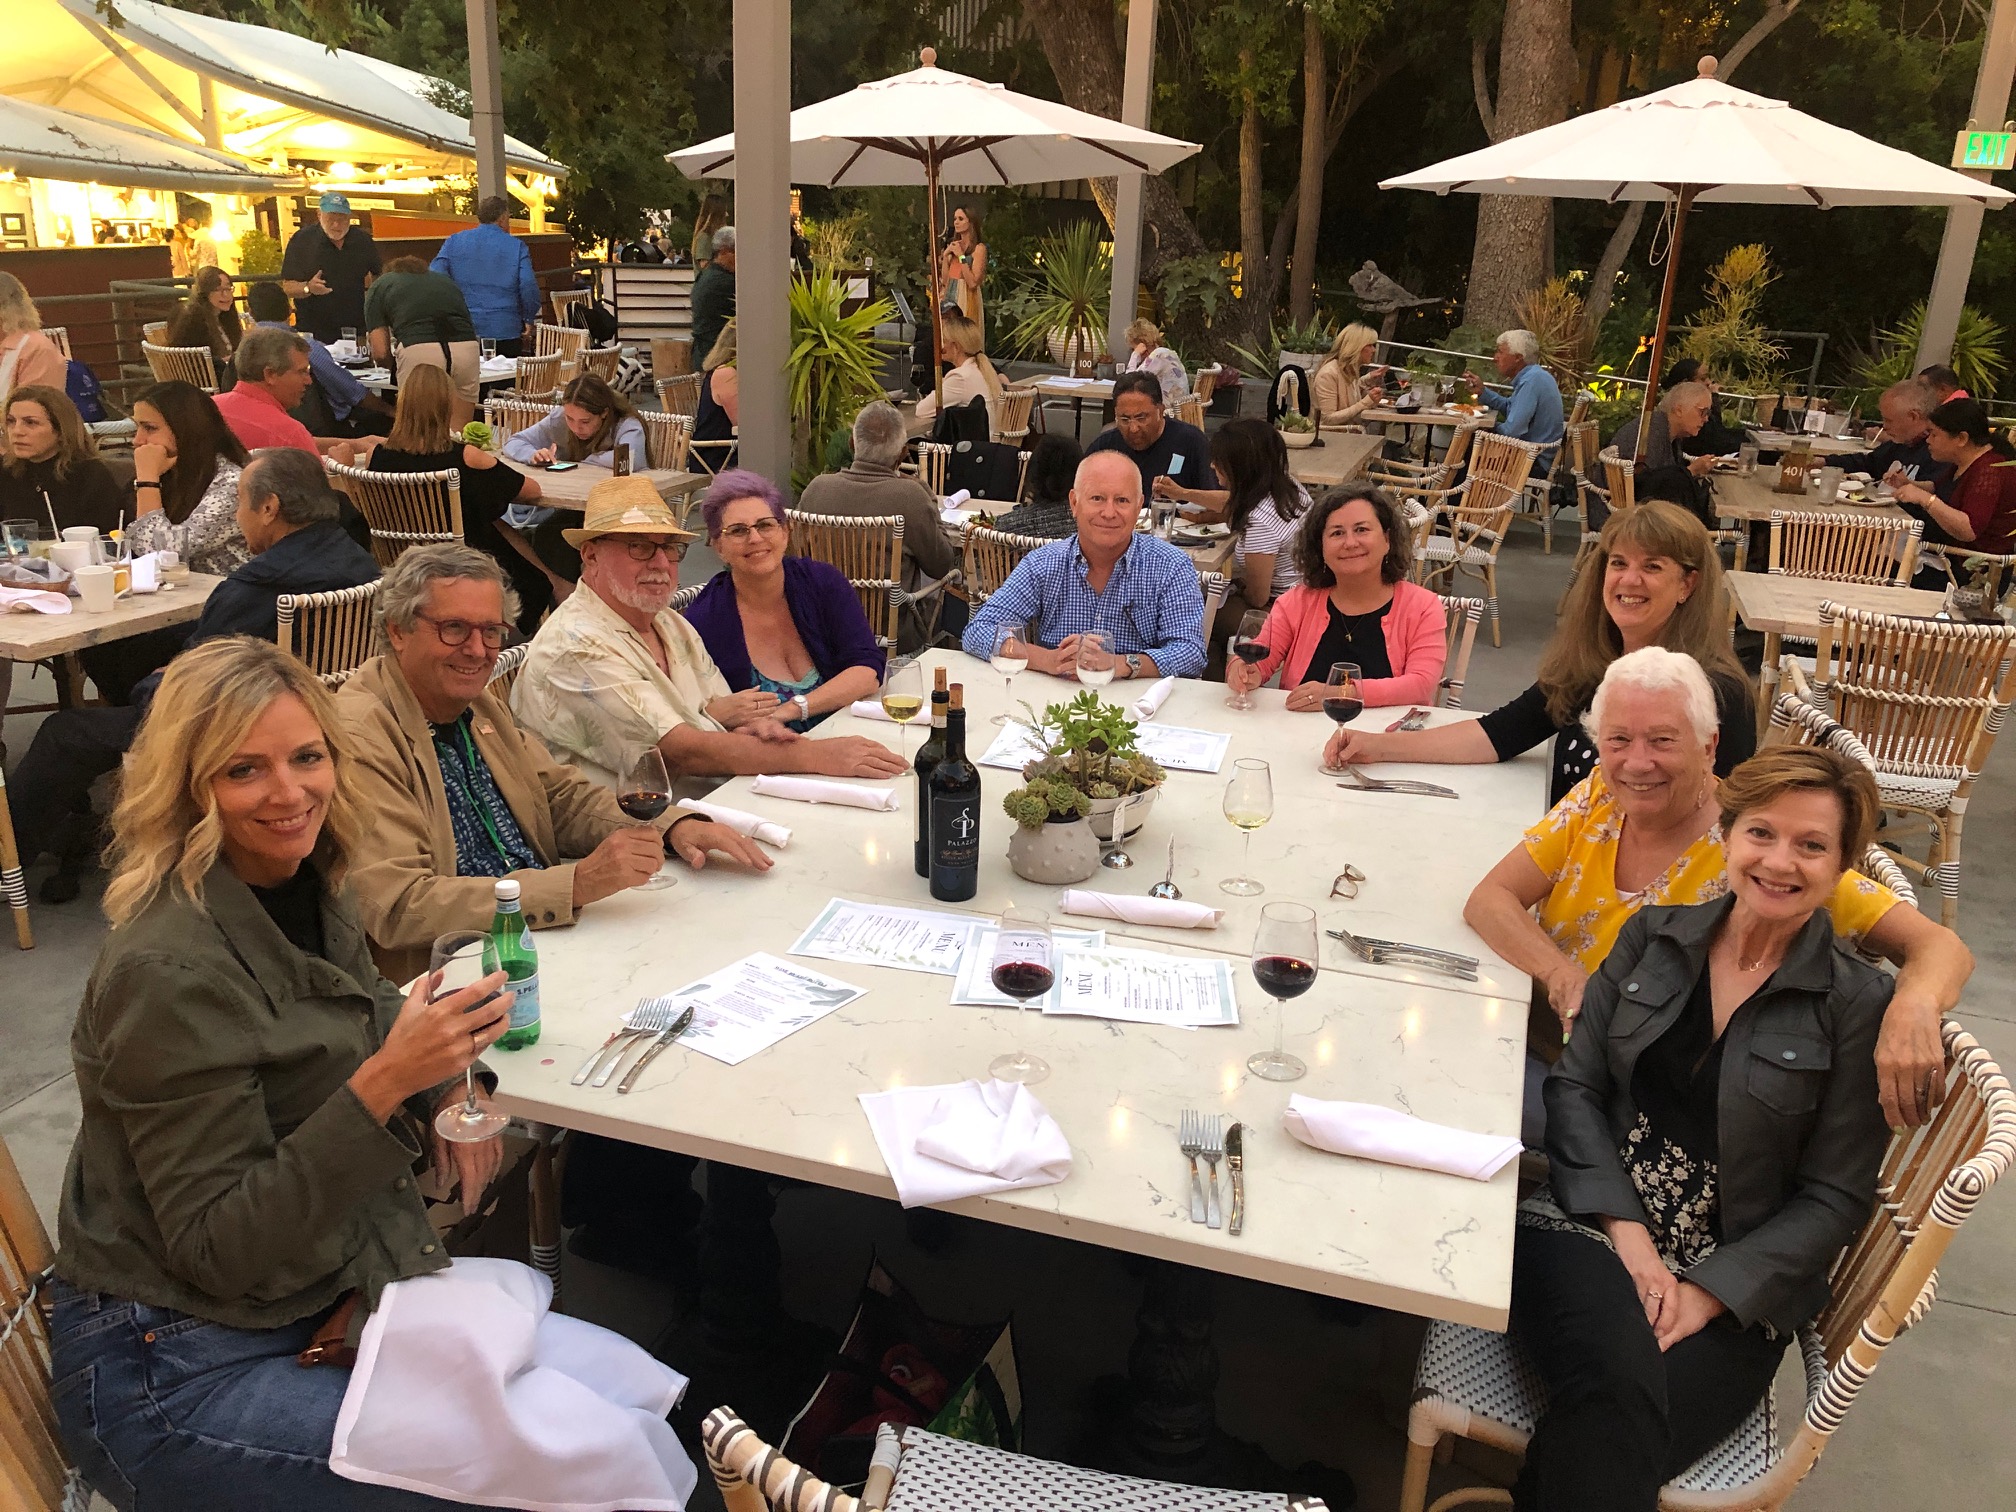 Nine people smiling and gathered around an outdoor dining table